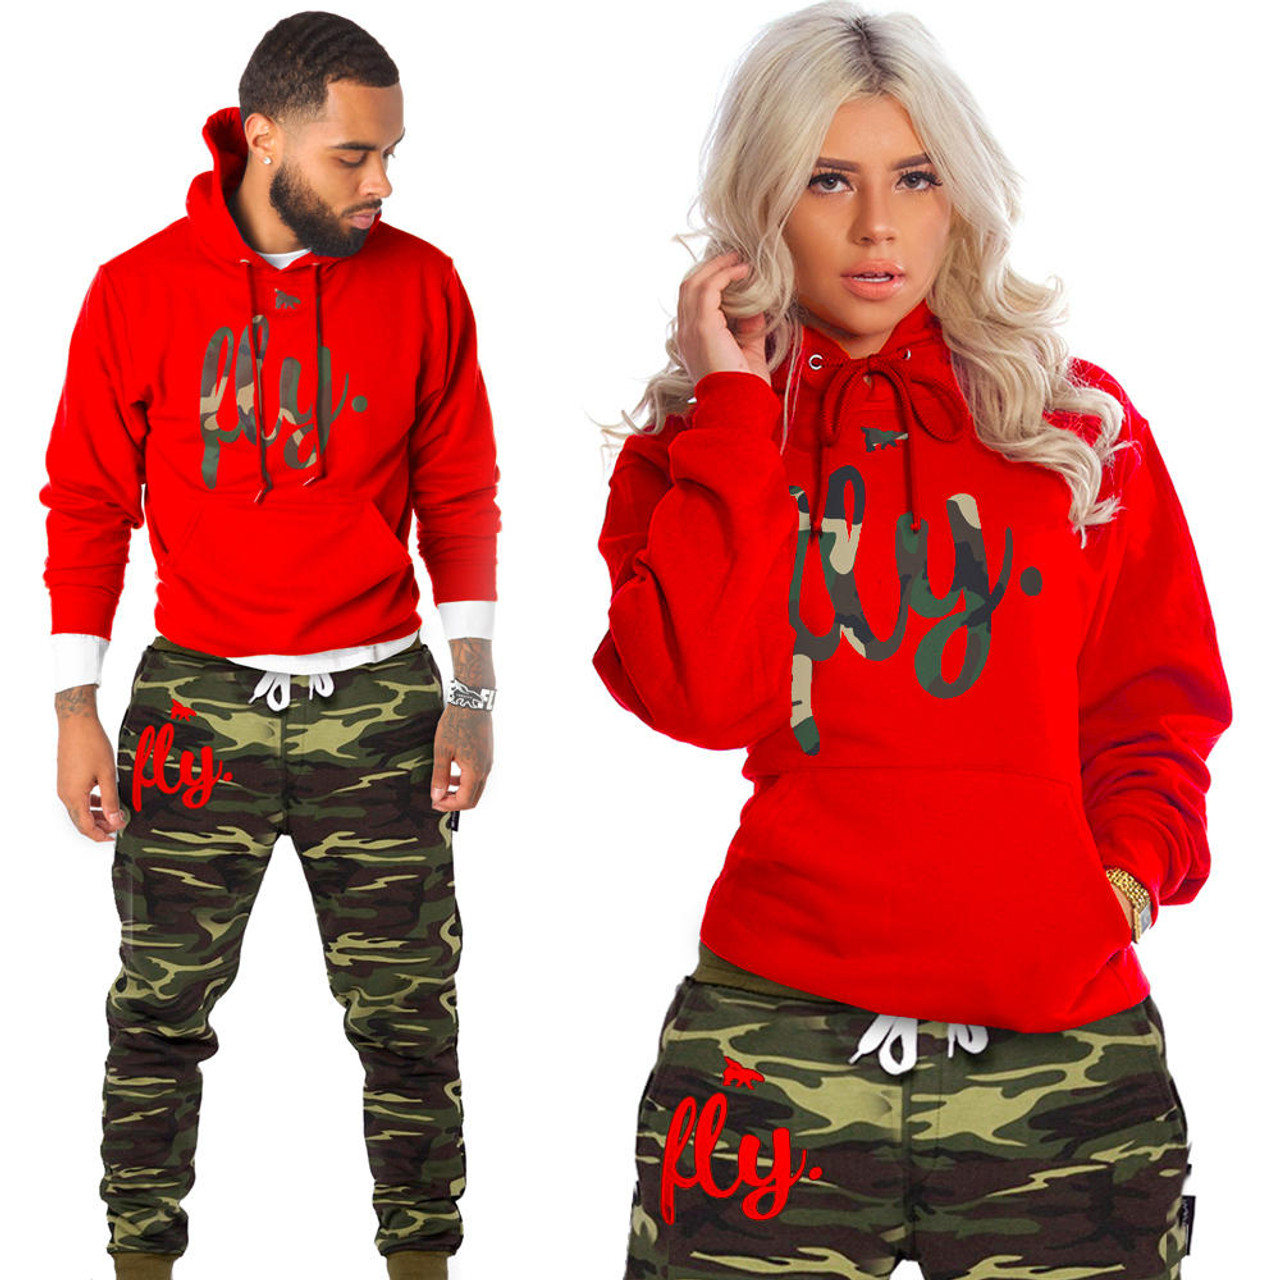 First Love Yourself (fly.) Camo Joggers Red Print - ShopFlyBrands